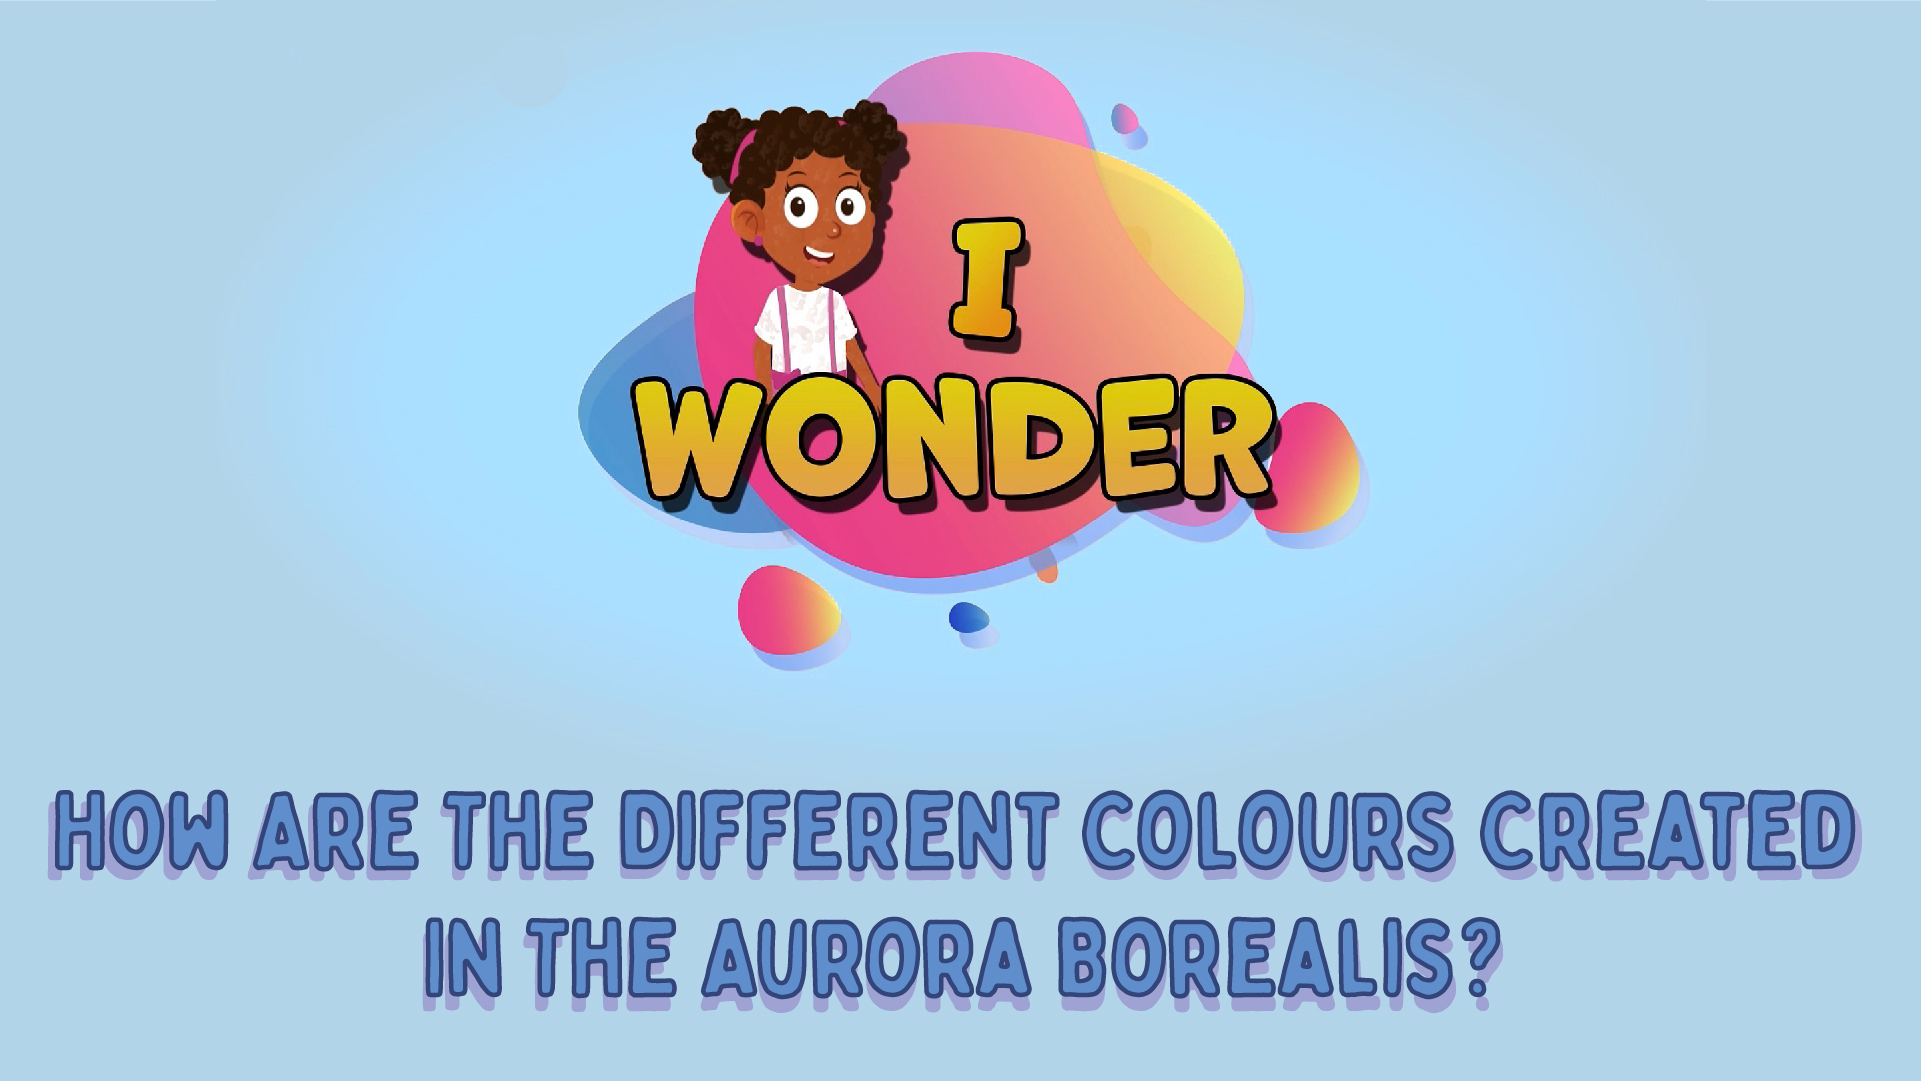 How Are The Different Colours Created In The Aurora Borealis?